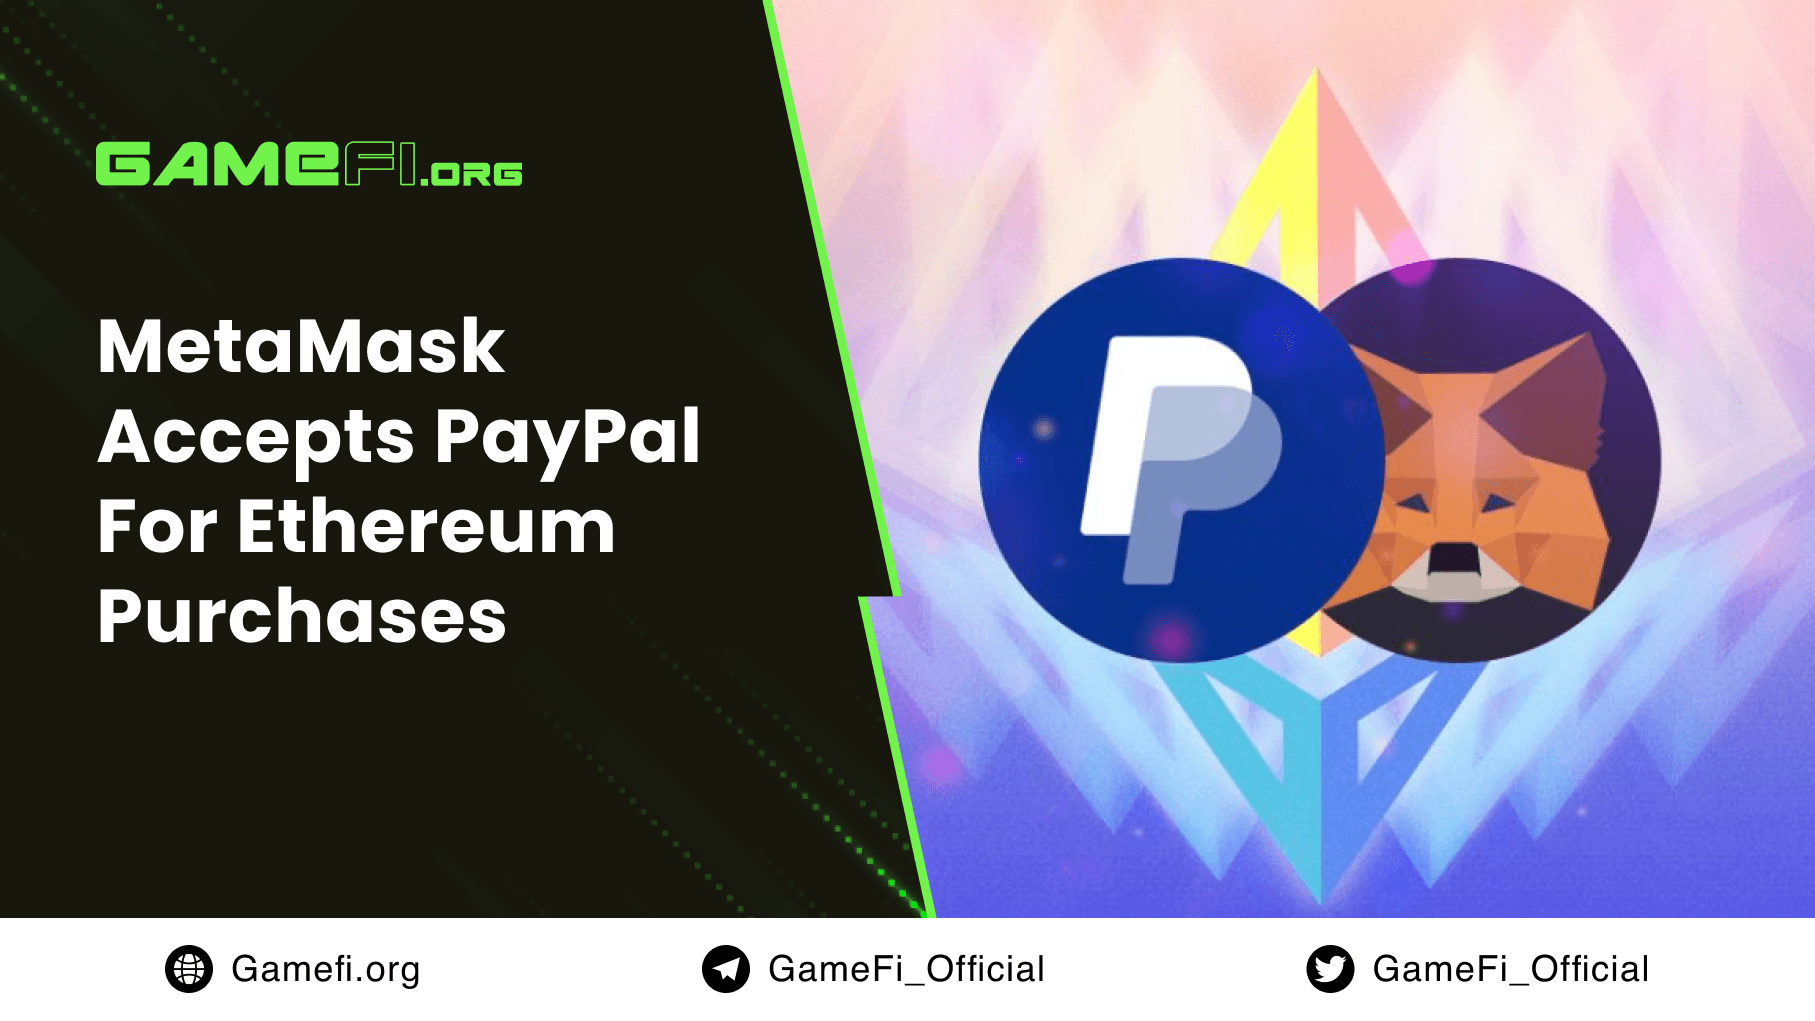 MetaMask Accepts PayPal For Ethereum Purchases